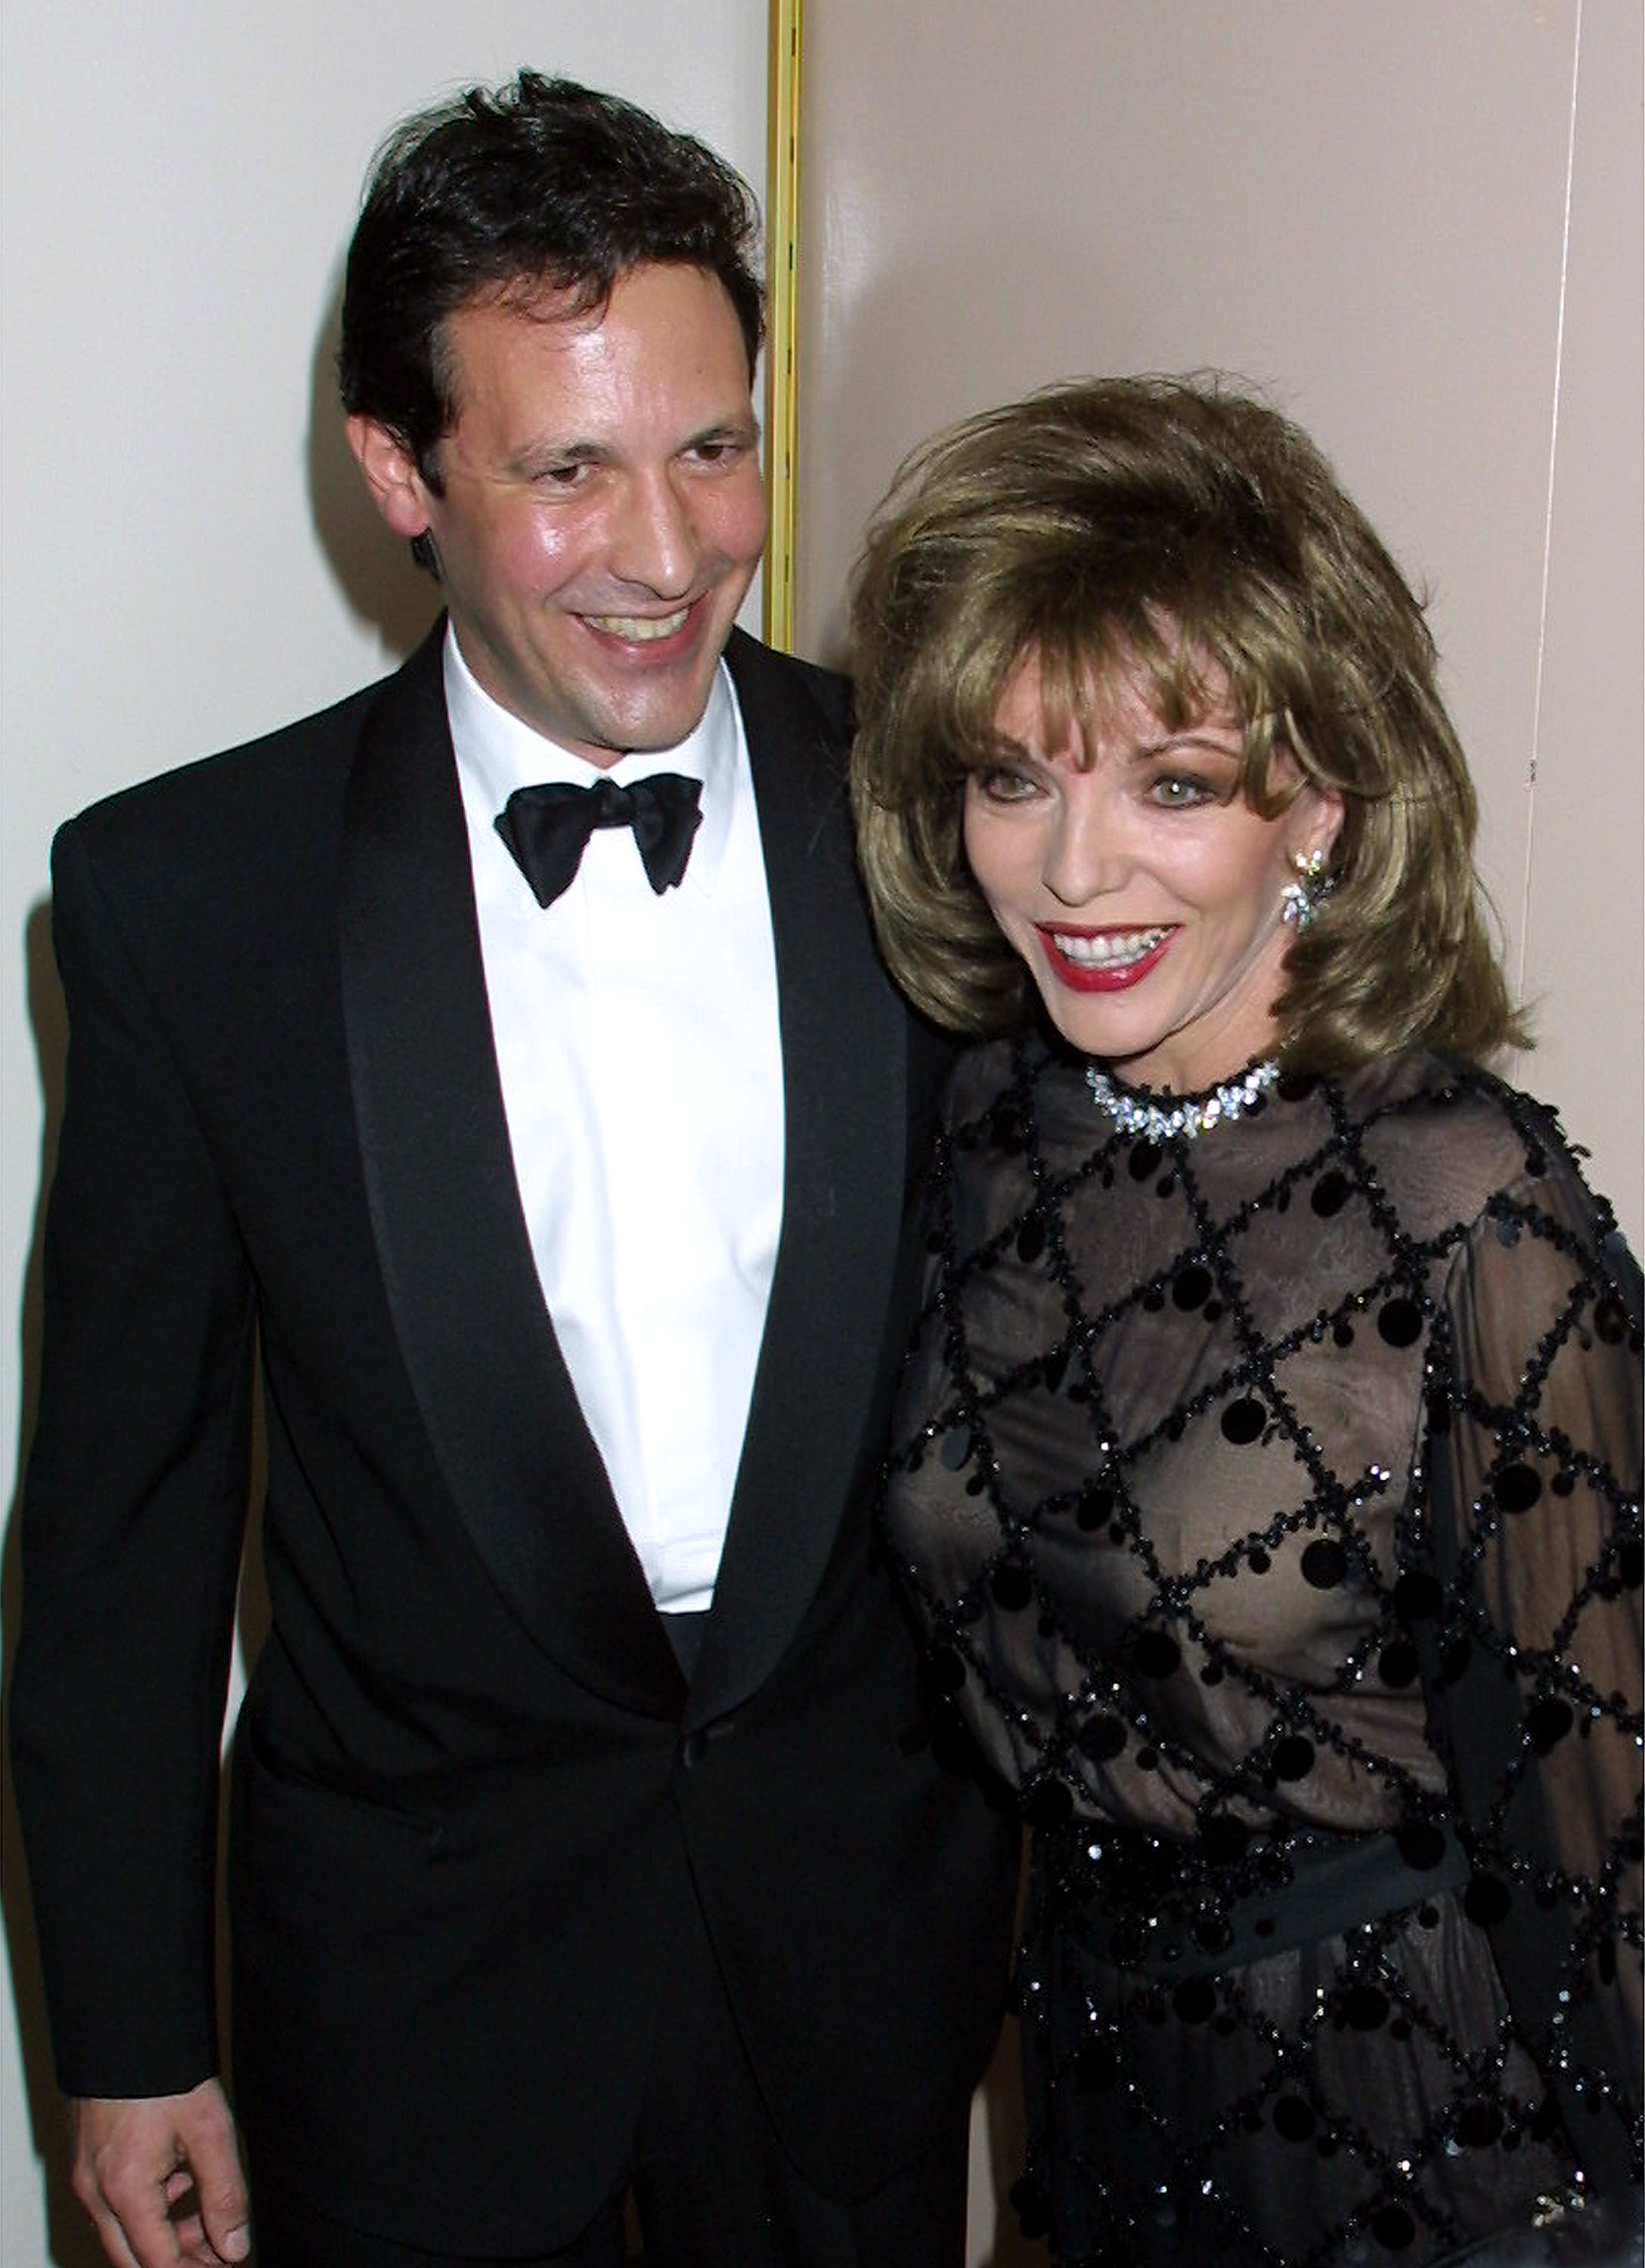 Joan Collins and her boyfriend Percy Gibson at the 12th Annual GLAAD Media Awards on April 16, 2001, in New York City | Source: Getty Images